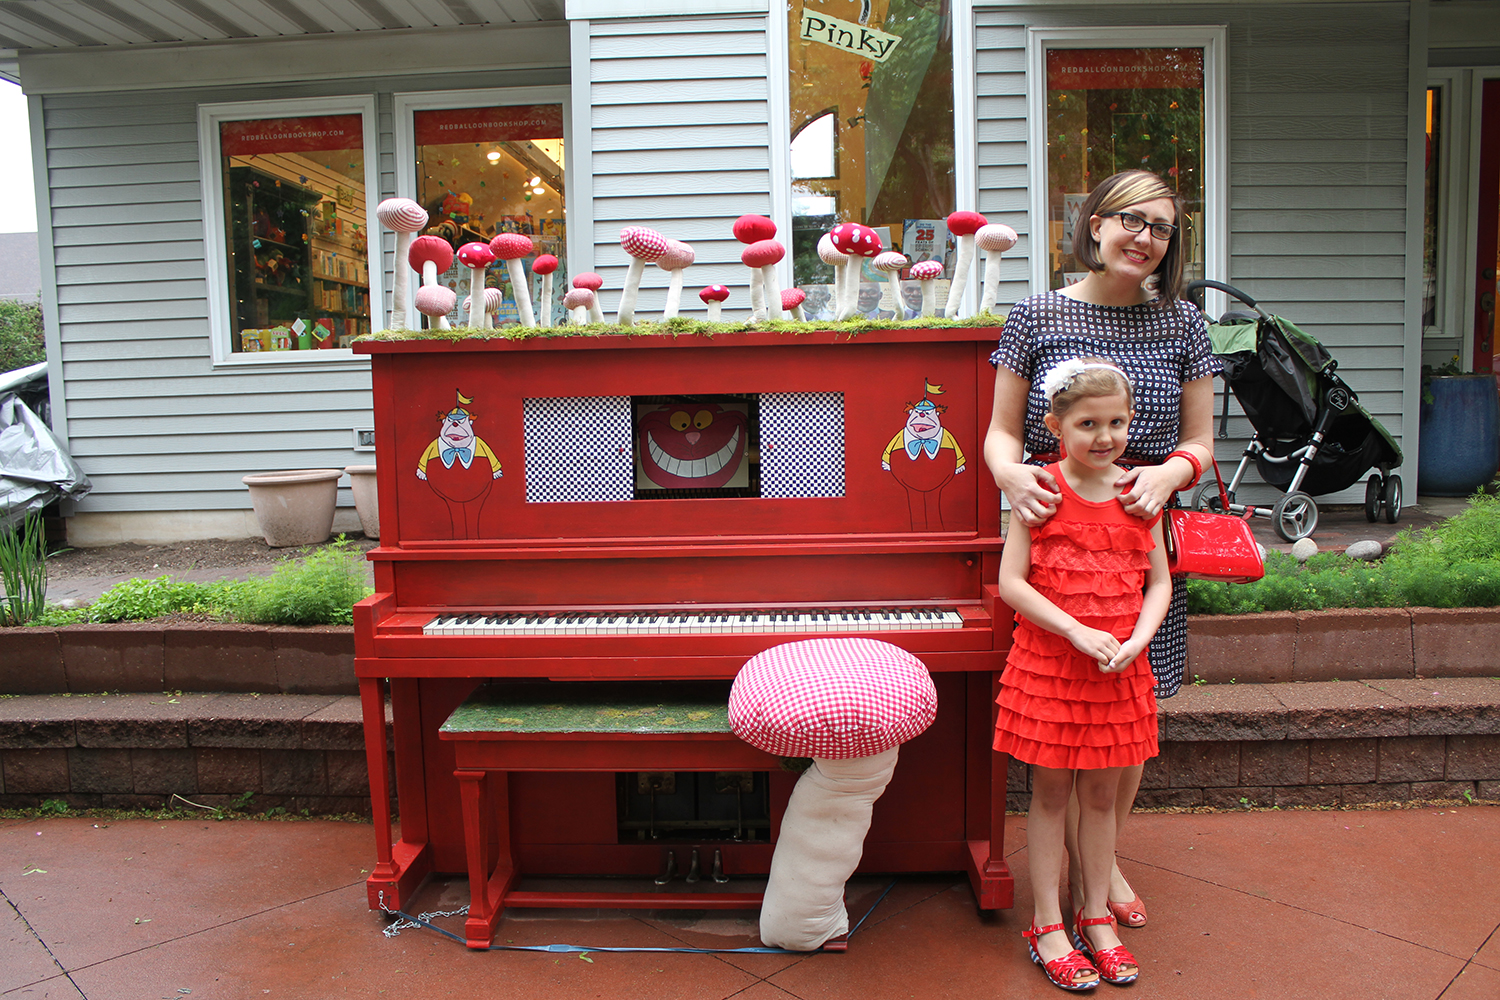 Pianos on Parade in the Red Balloon Bookstore , via http://www.keys44kids.org/pianos-on-parade/